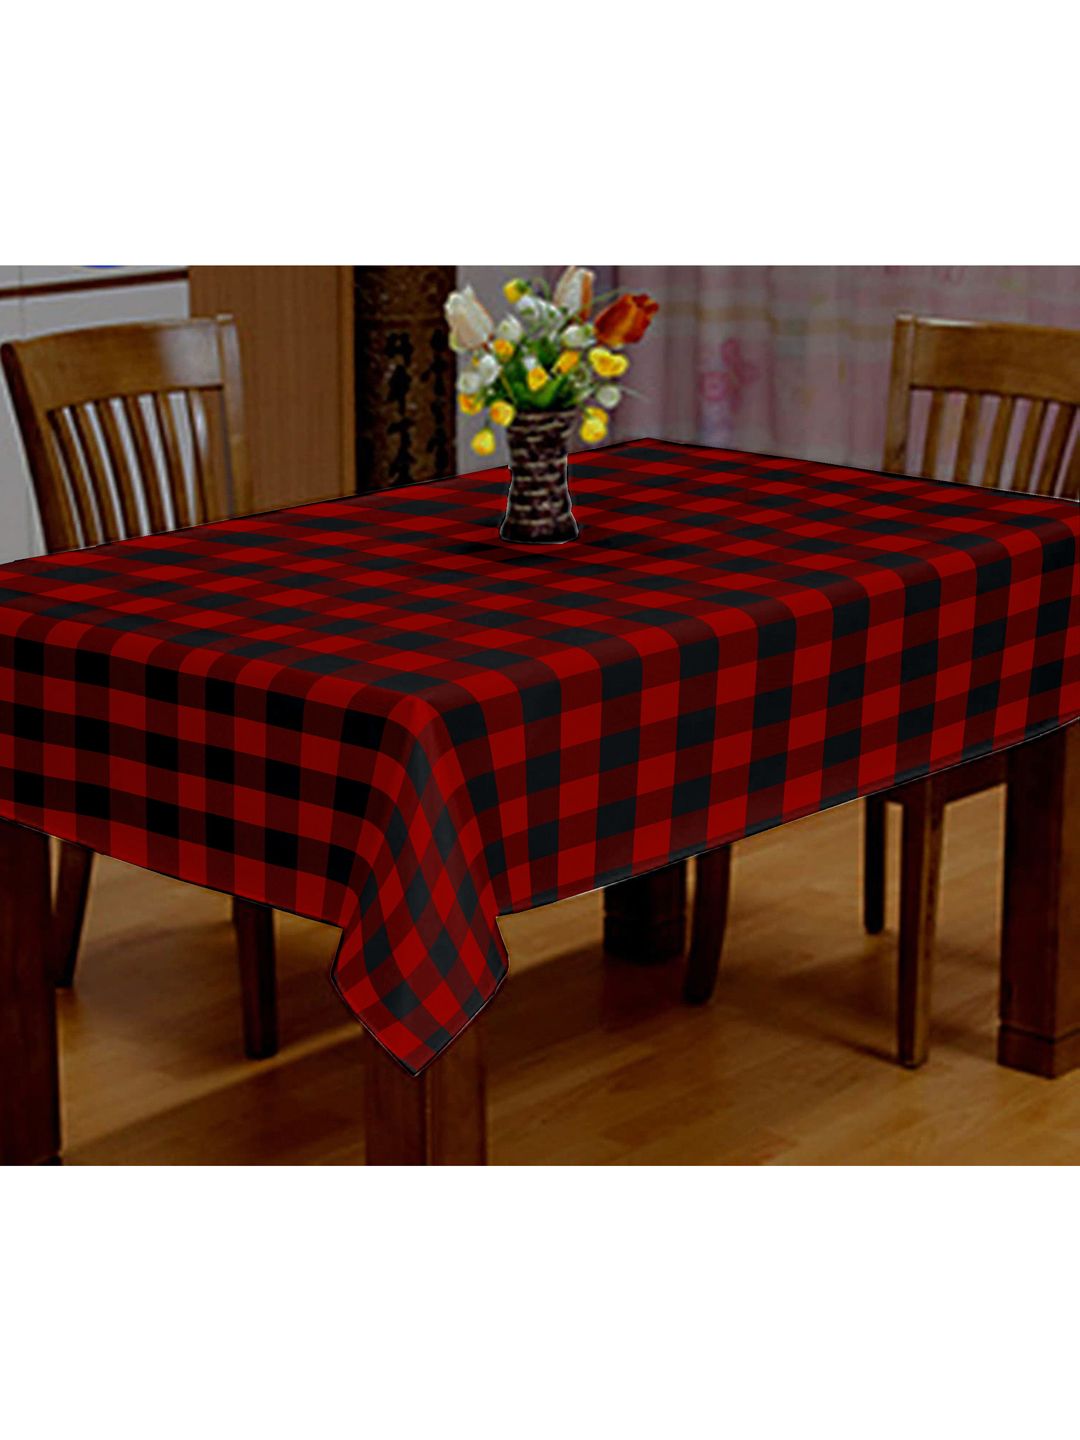 Lushomes Red & Black Buffalo Checks Square 4 Seater Dining Table Cover Cloth Price in India